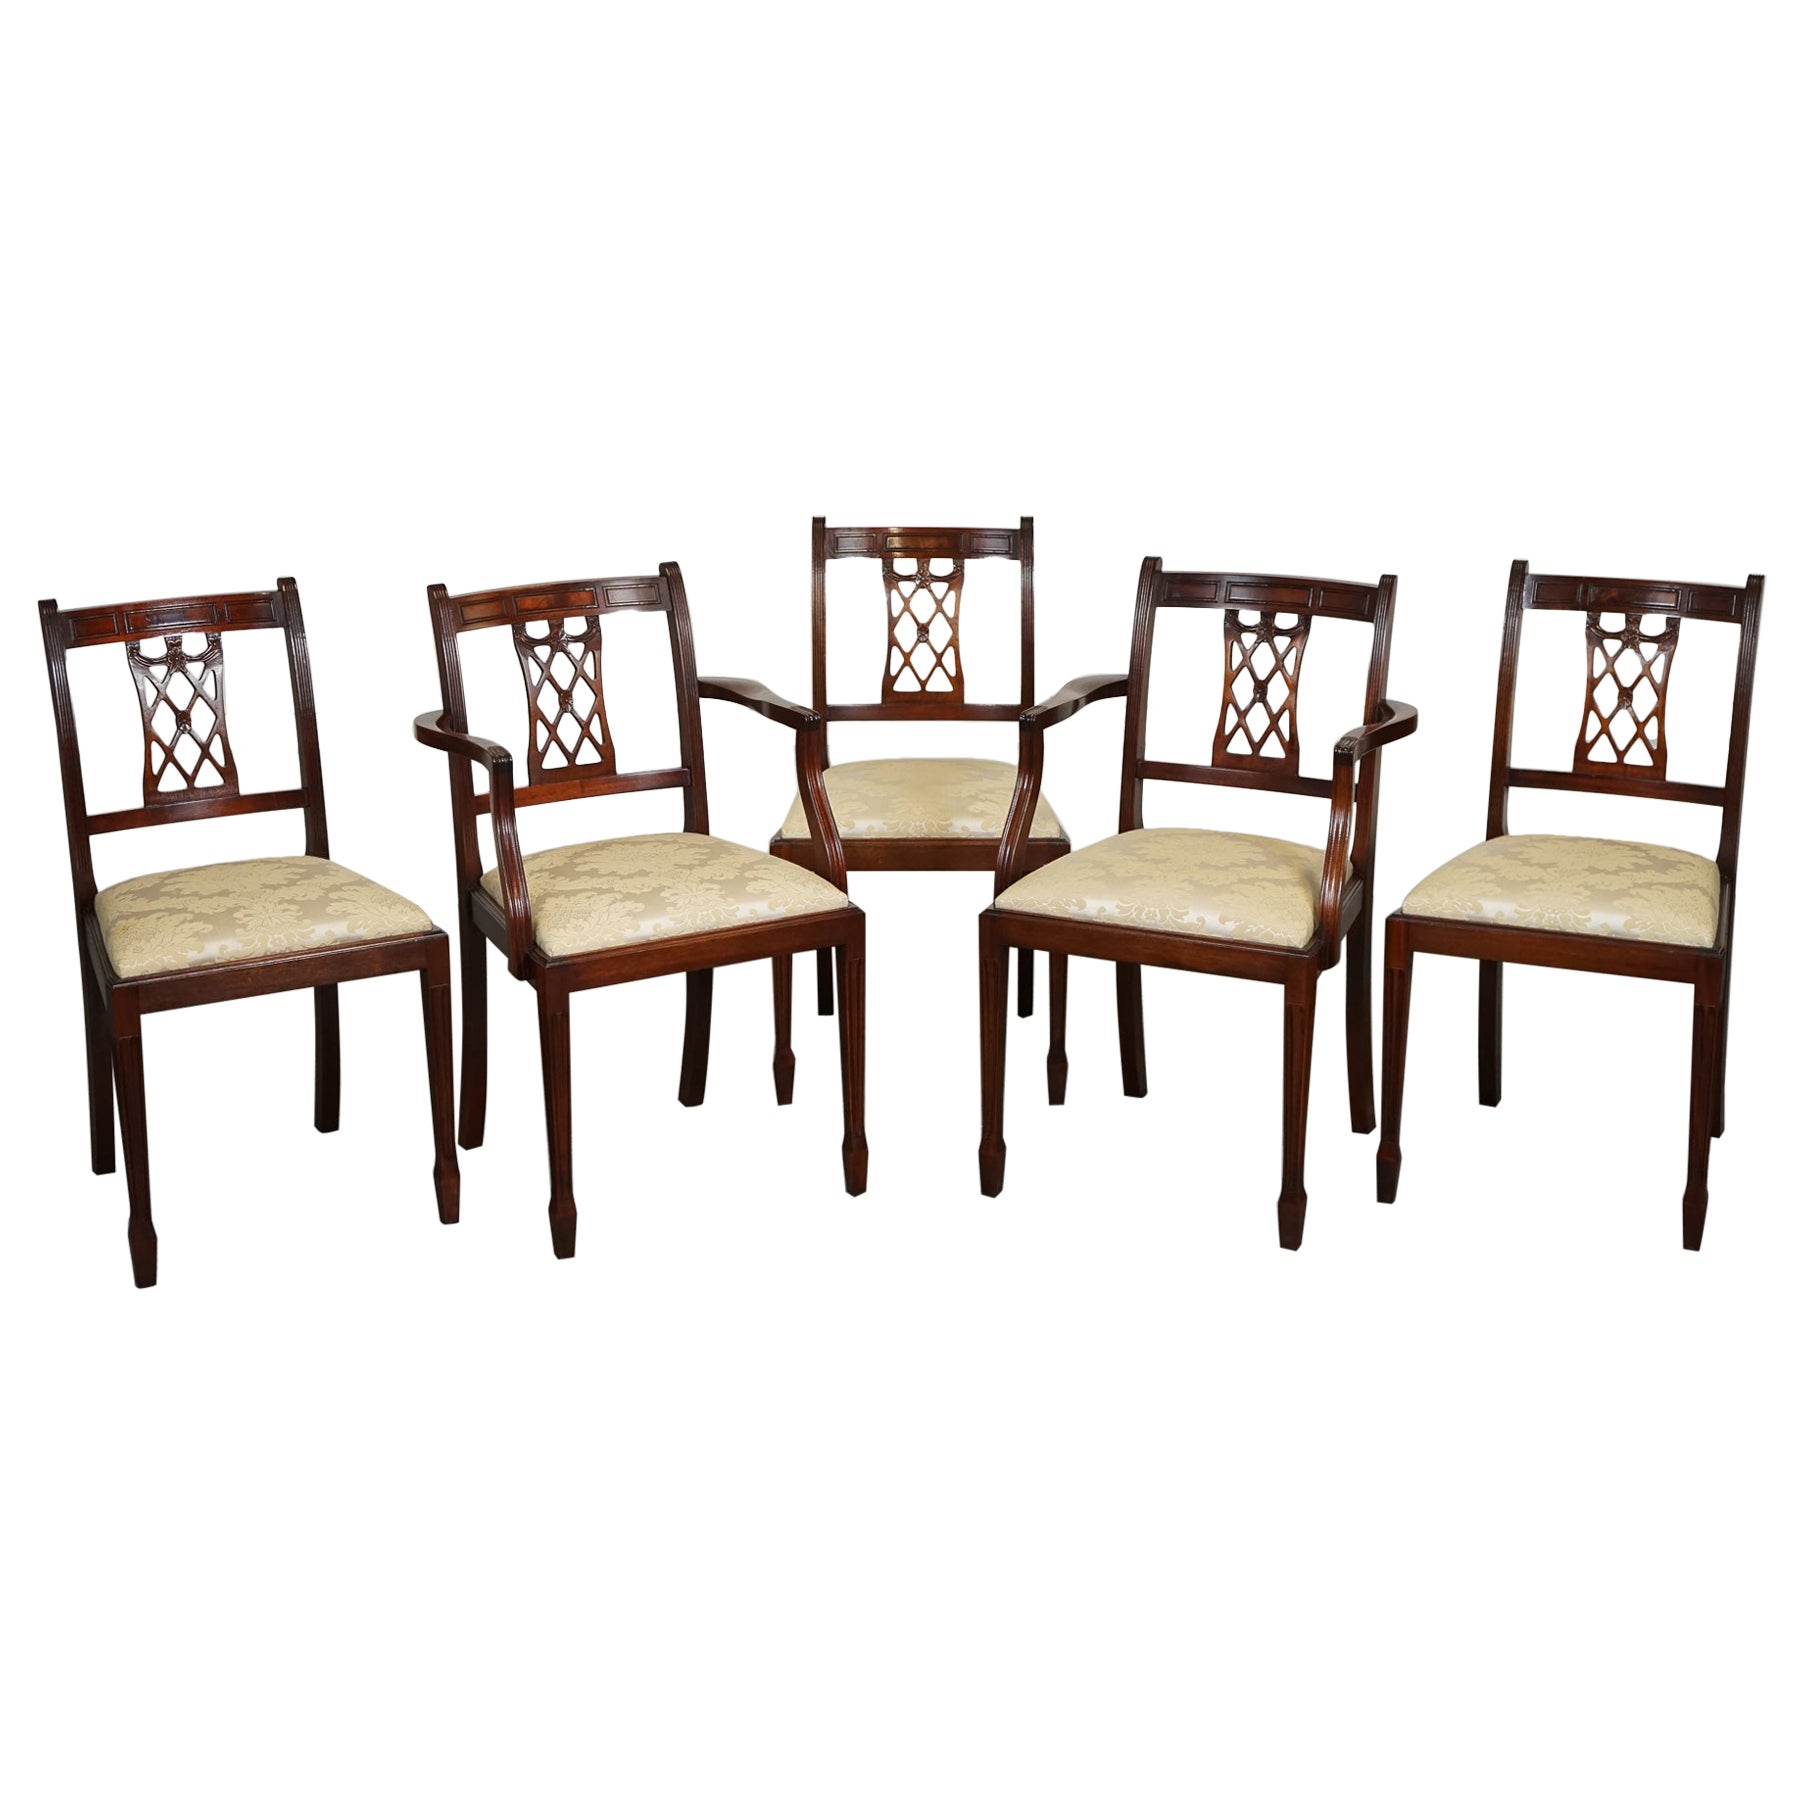 HEPPLEWHITE STYLE BEVAN FUNNELL SET OF 5 DINING CHAiRS CREAM UPHOLSTERED SEATS For Sale